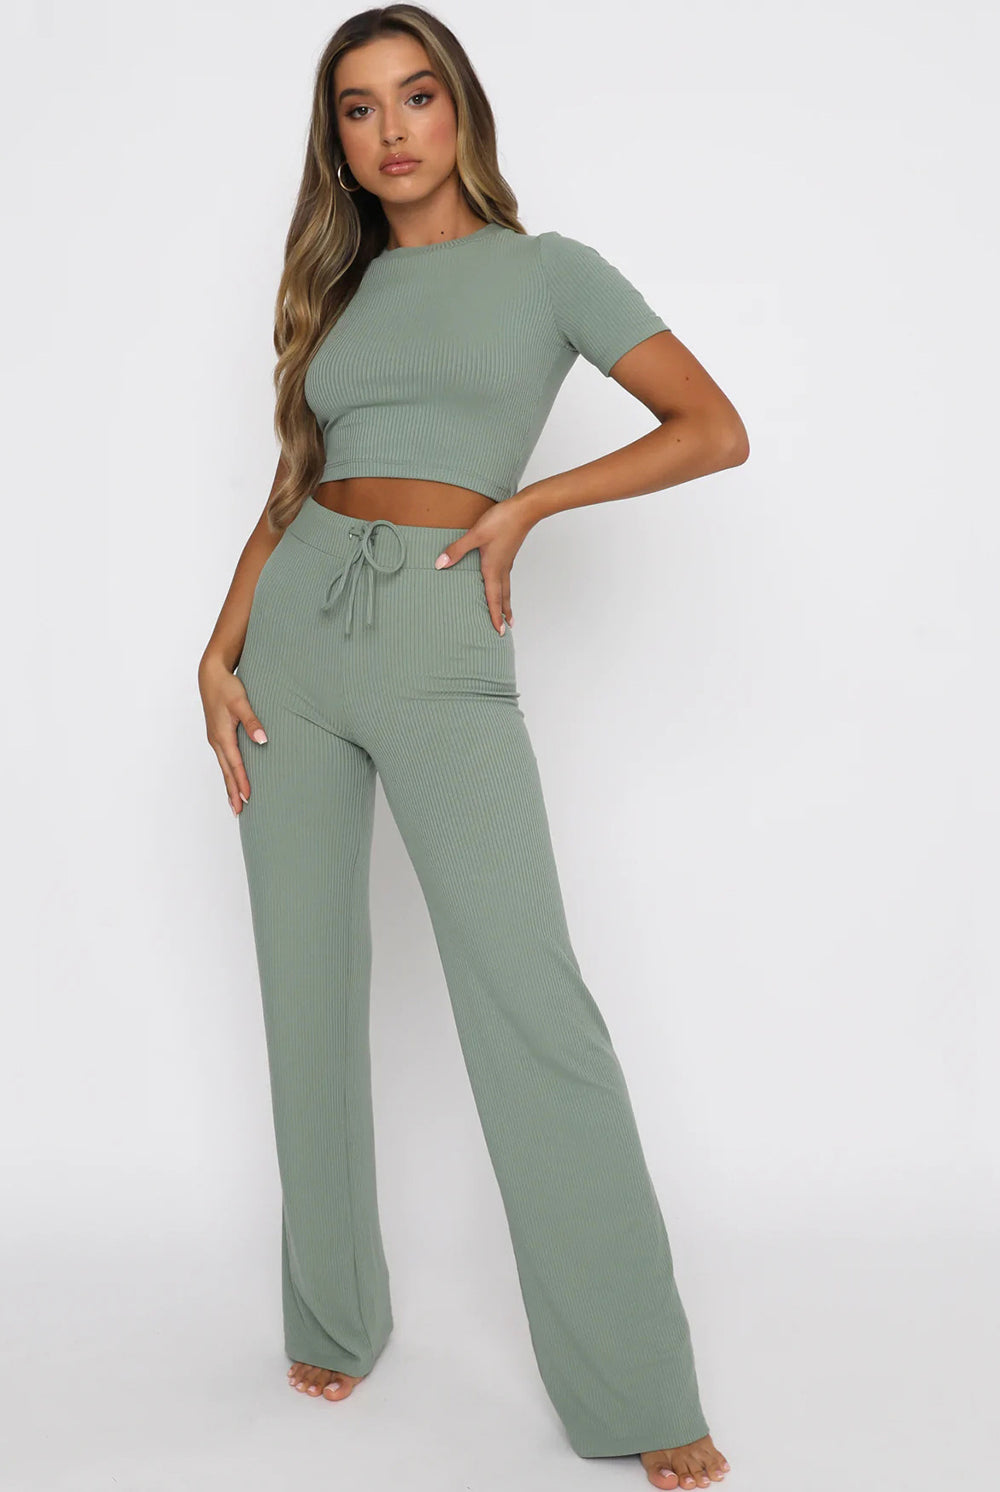 Round Neck Short Sleeve Top and Pants Set - GemThreads Boutique Round Neck Short Sleeve Top and Pants Set